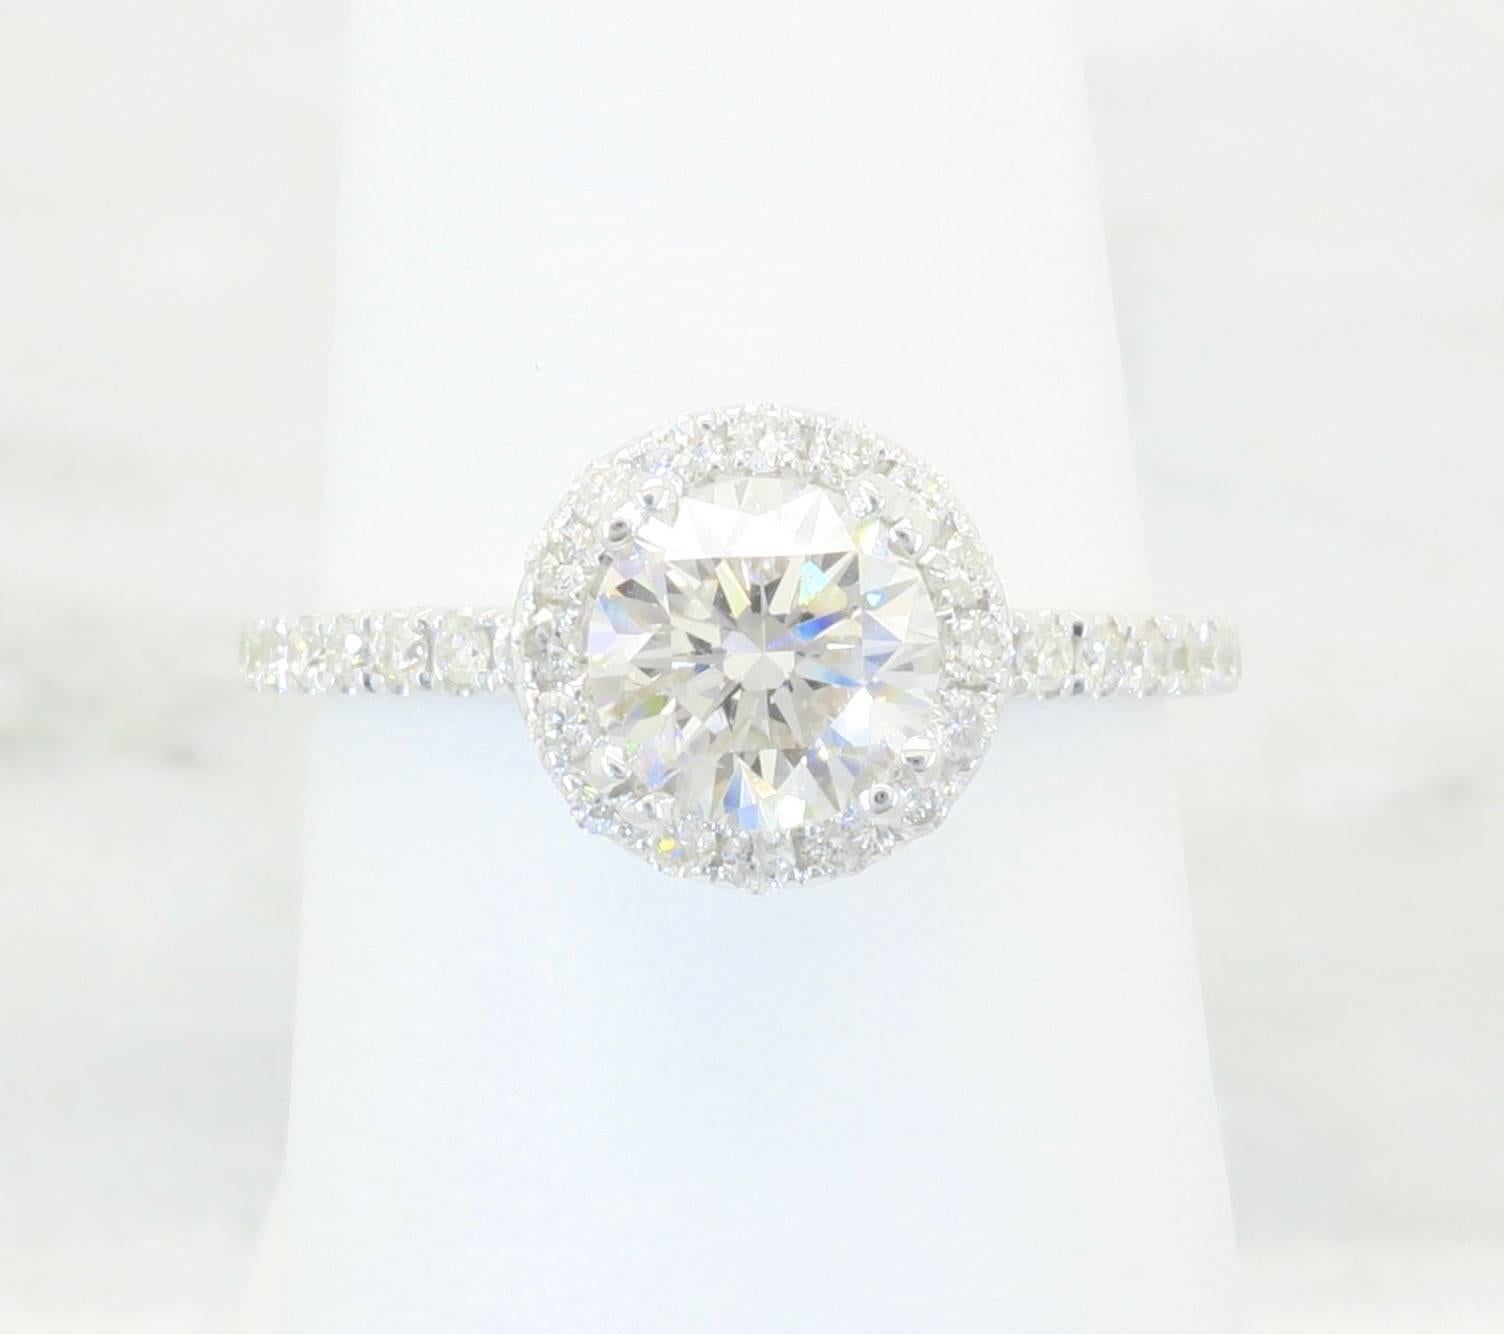 Very elegant 18K White Gold Odelia Designer Diamond ring with a .80CT Round Brilliant Cut Diamond. This diamond is H-I color and I1 Clarity. The ring also contains an additional 36 Round Brilliant Cut diamonds. The total carat weight is